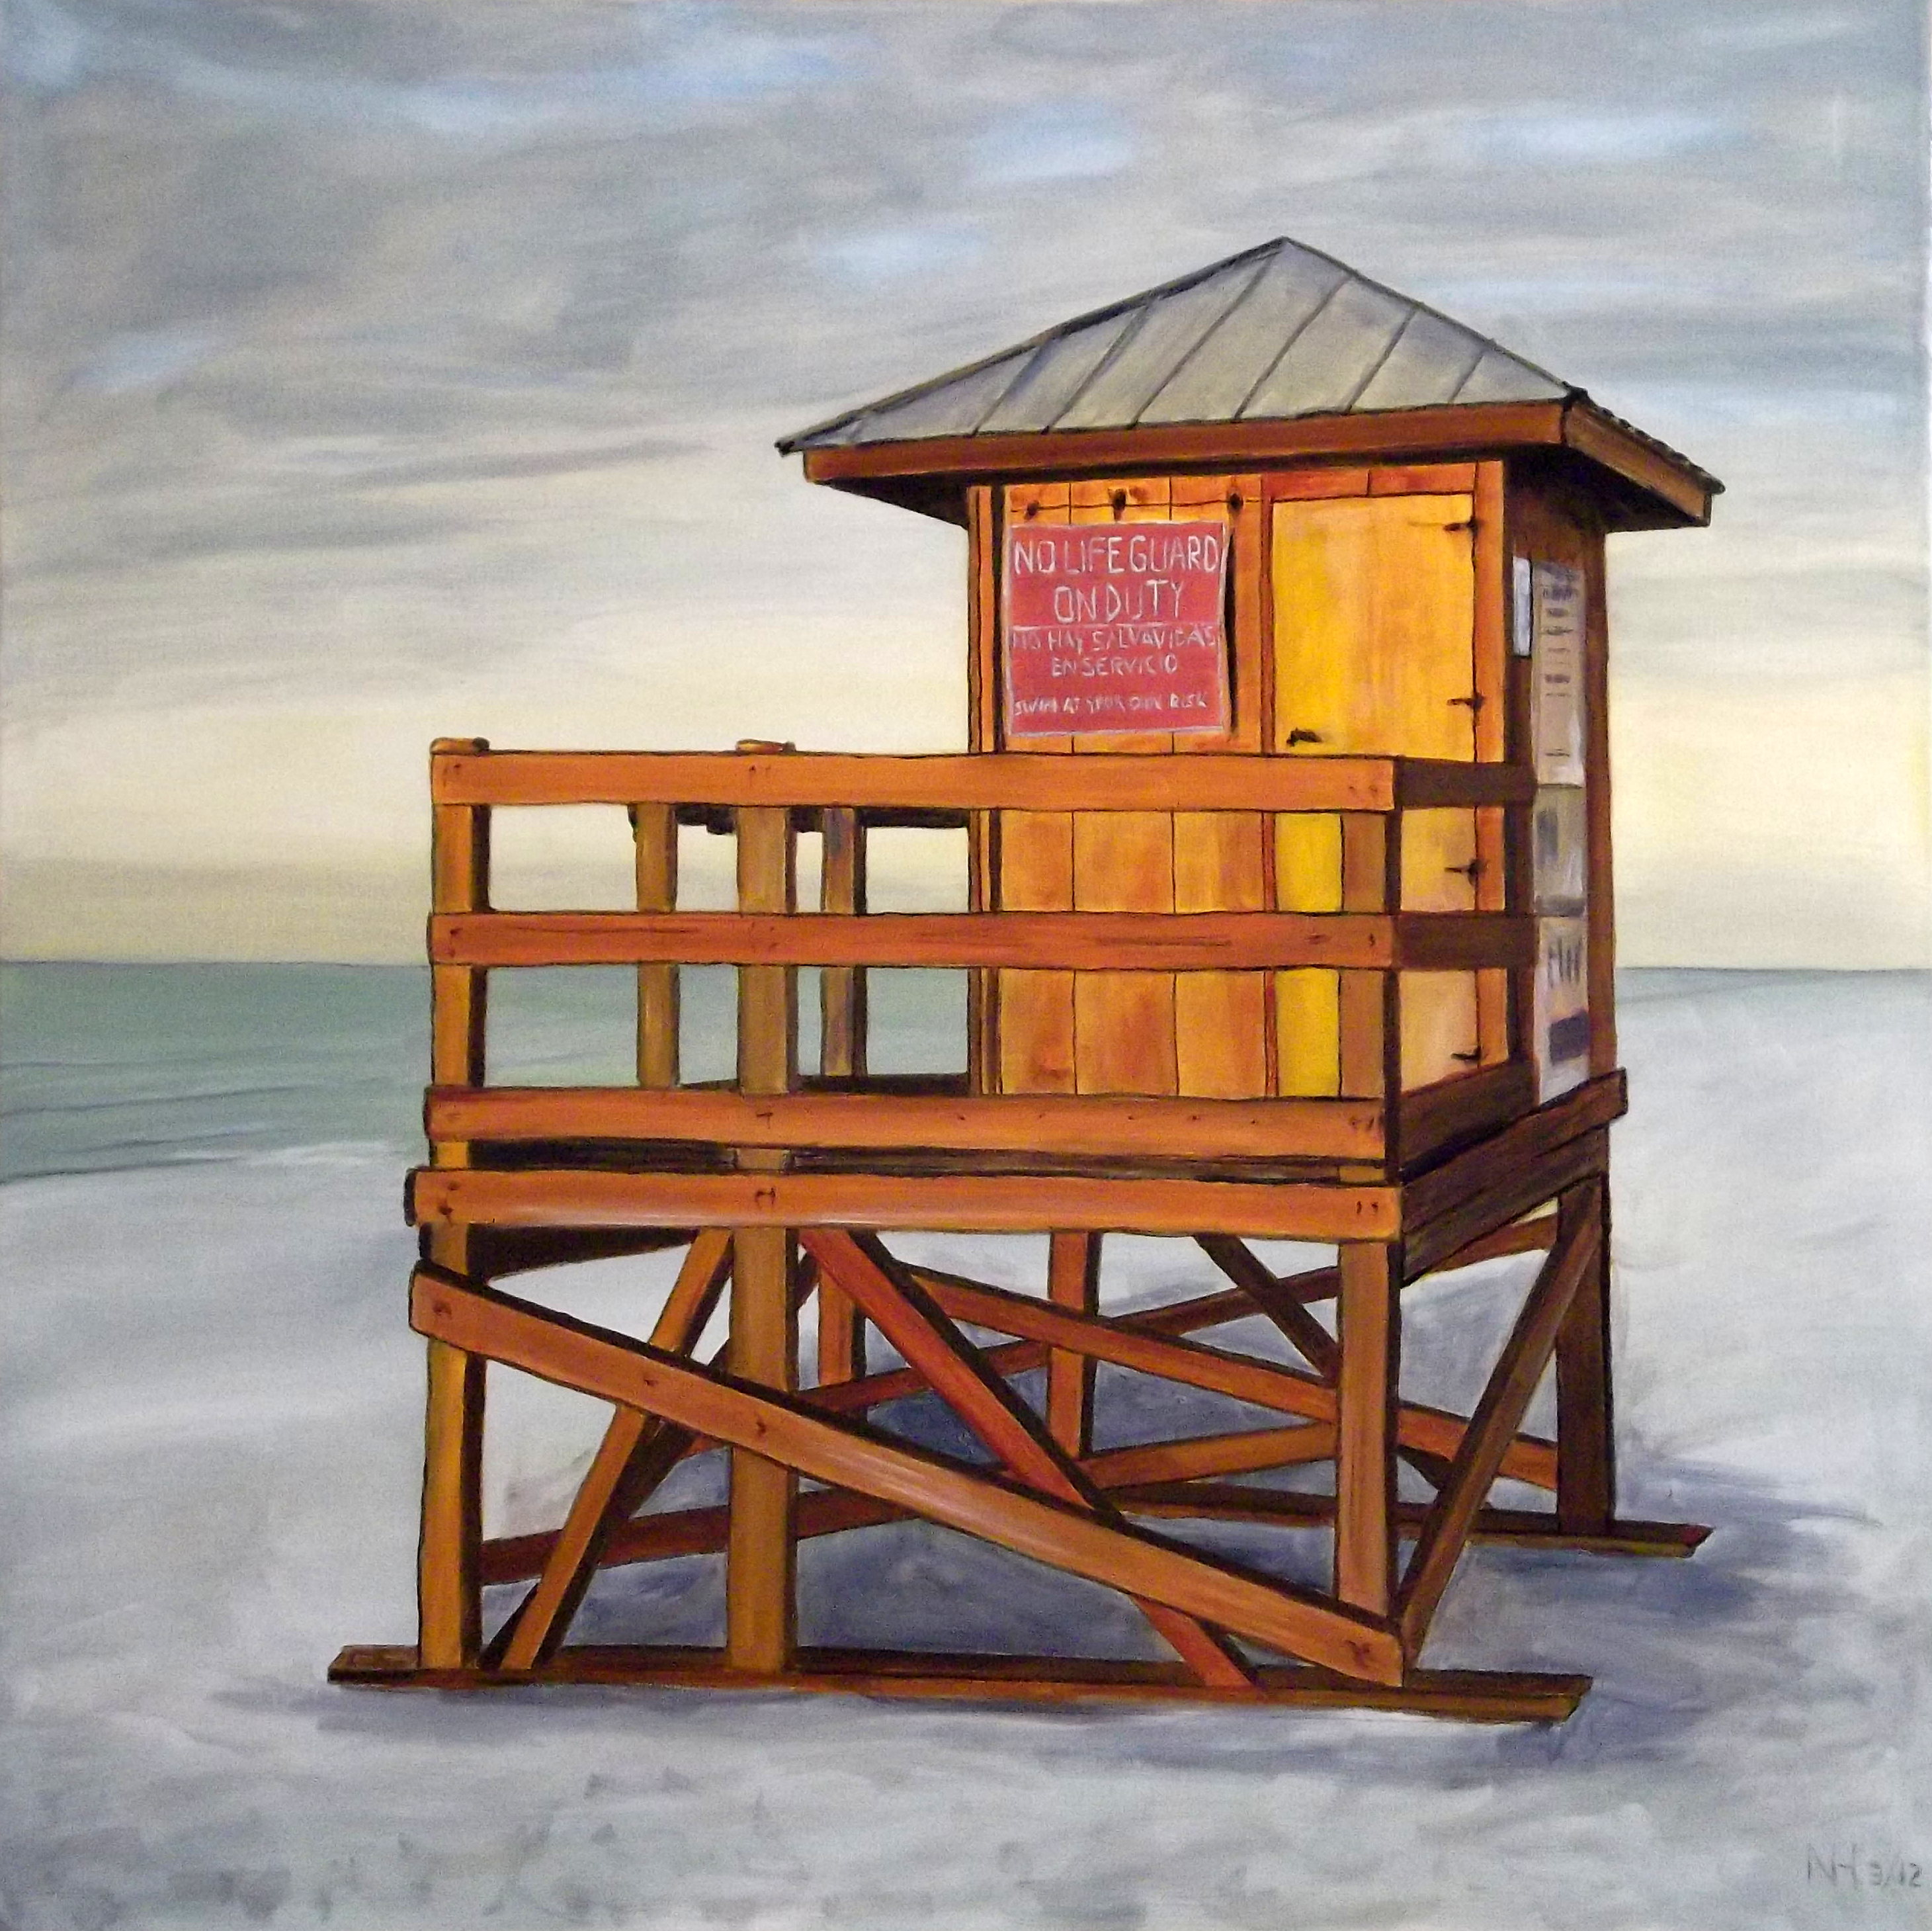 No Lifeguard, Oil on Canvas, 36 x 36 inches, March 2012